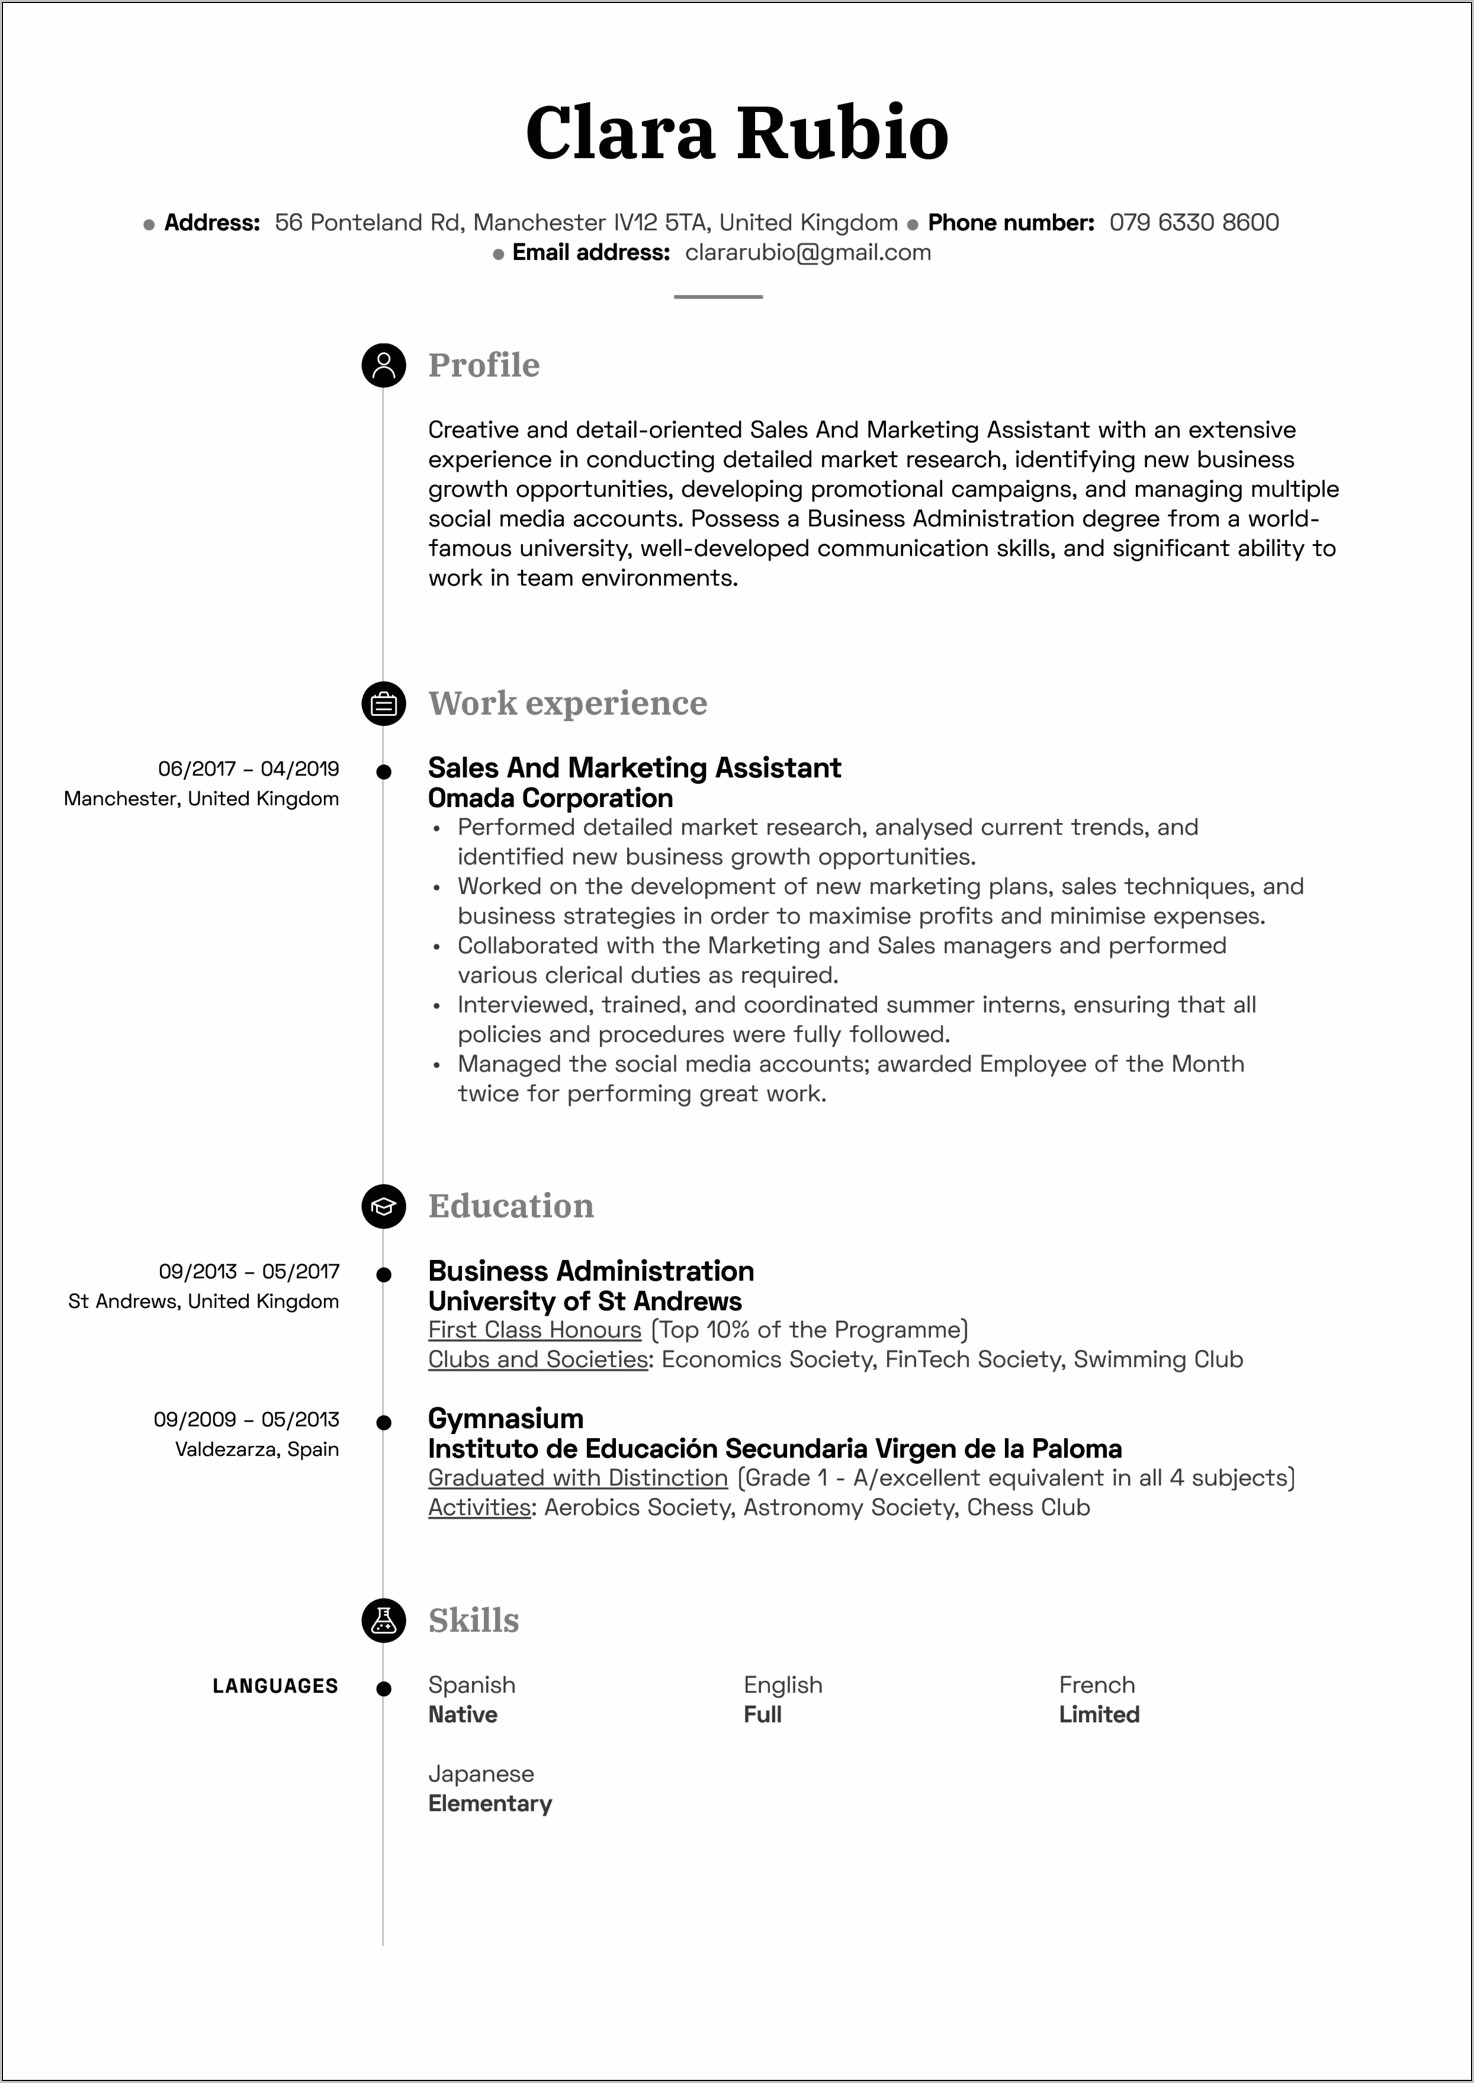 Qualifications And Skills For Sales In A Resume